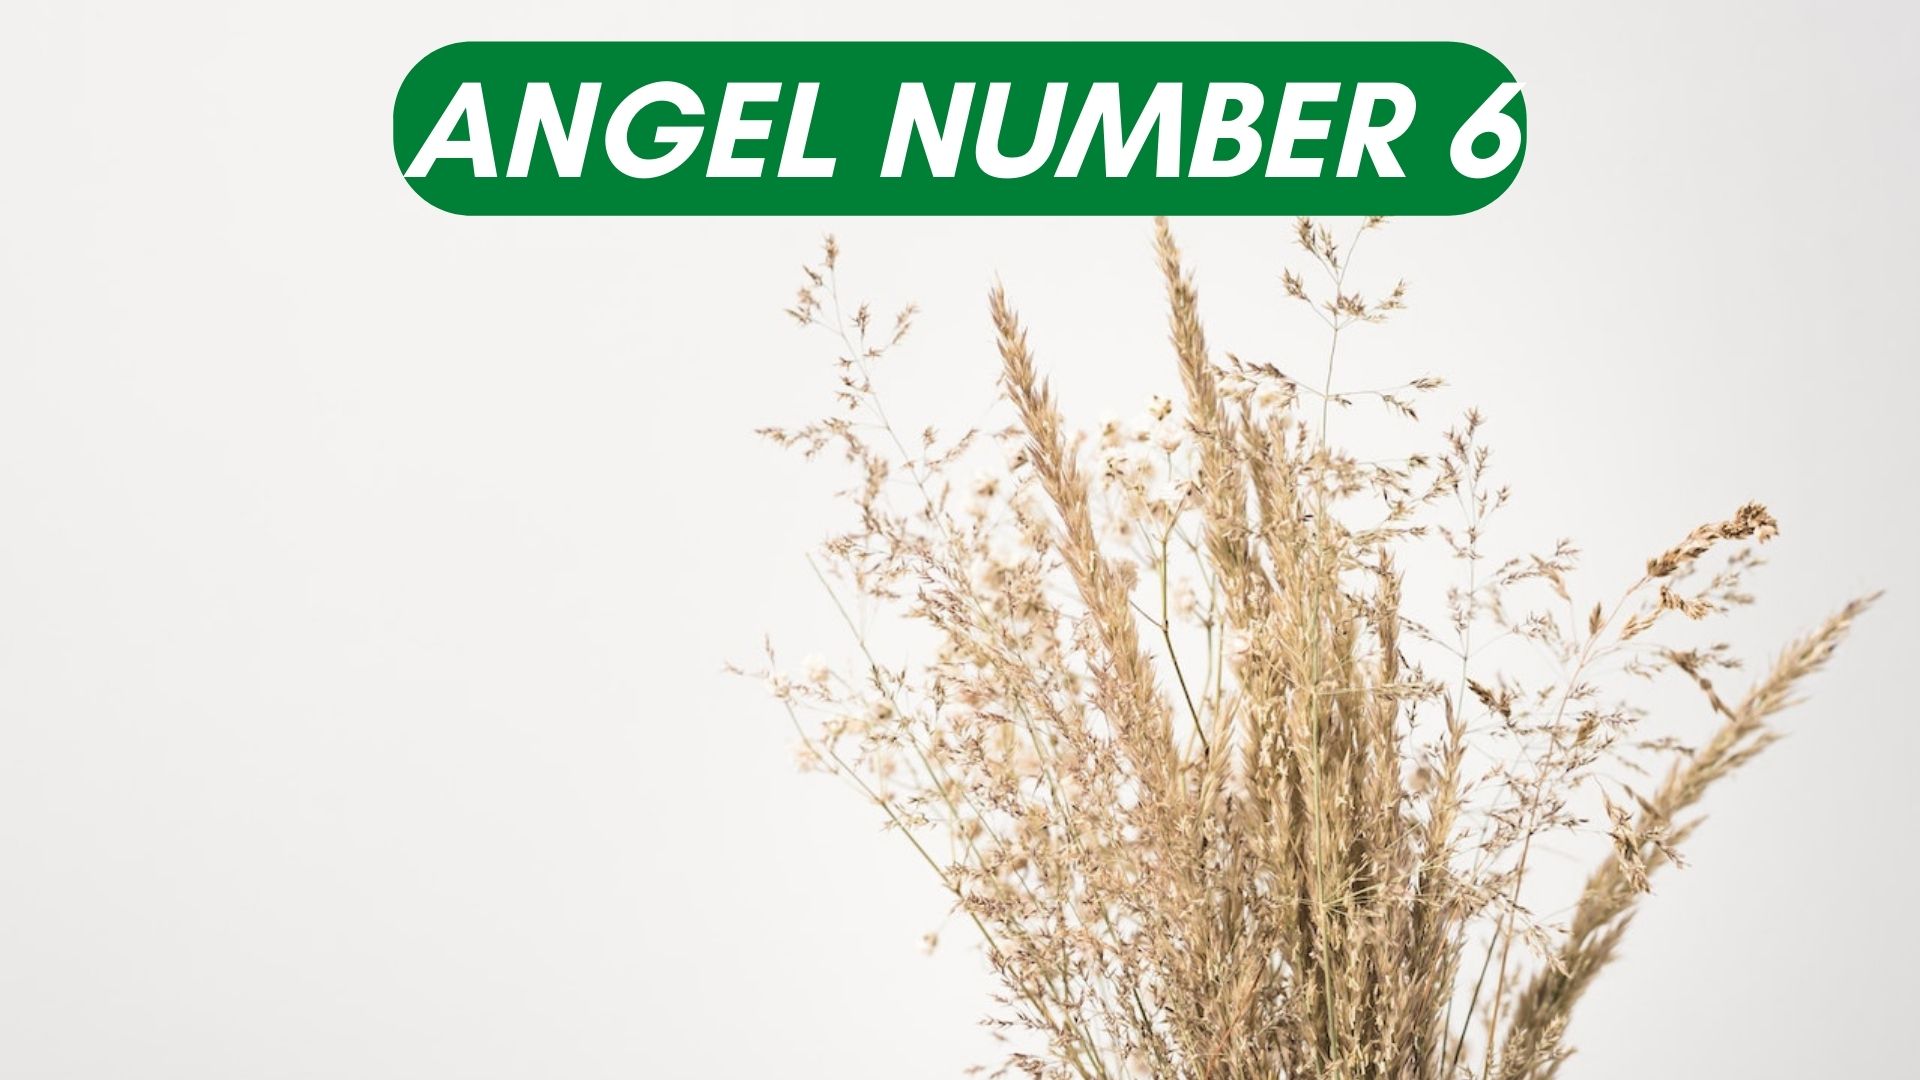 Angel Number 6 Meaning - Spiritual Significance And Symbolism